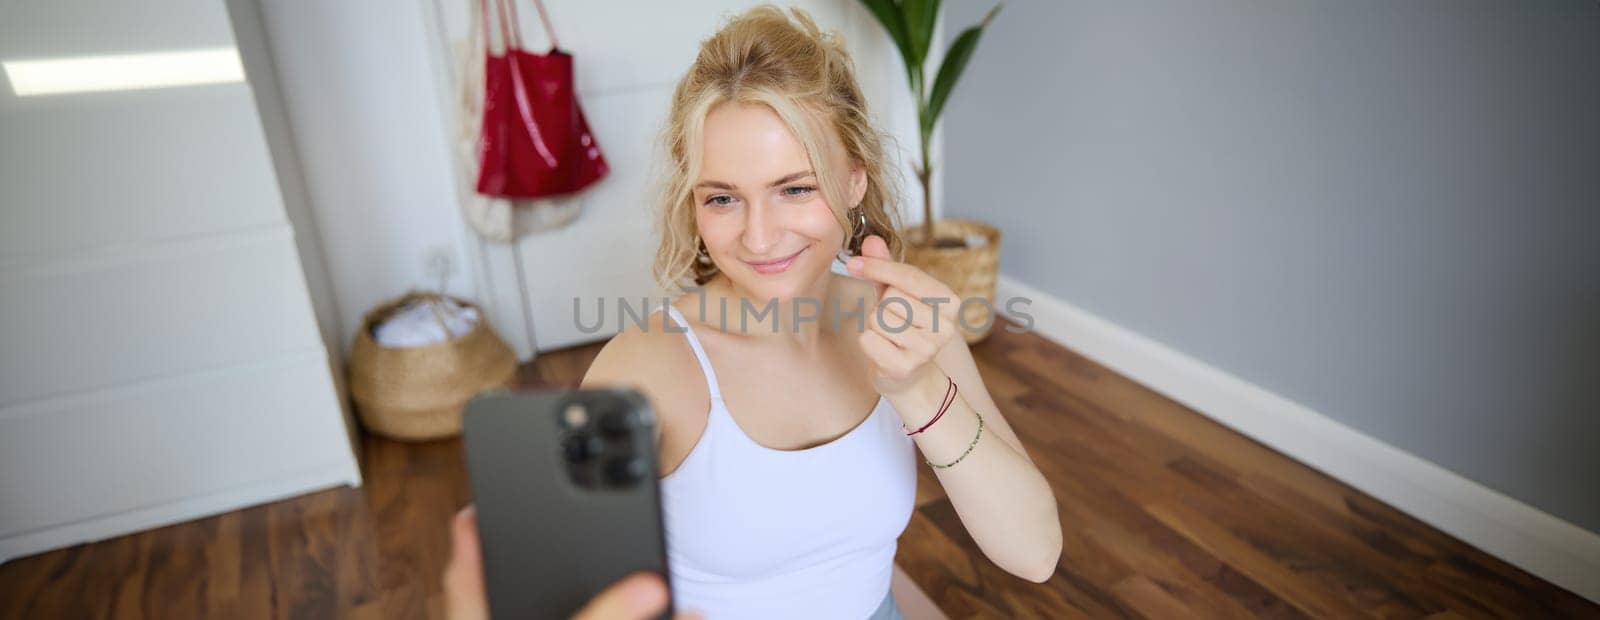 Portrait of smiling, beautiful young woman, social media content creator, takes selfies on smartphone during workout, doing exercises at home on yoga mat.